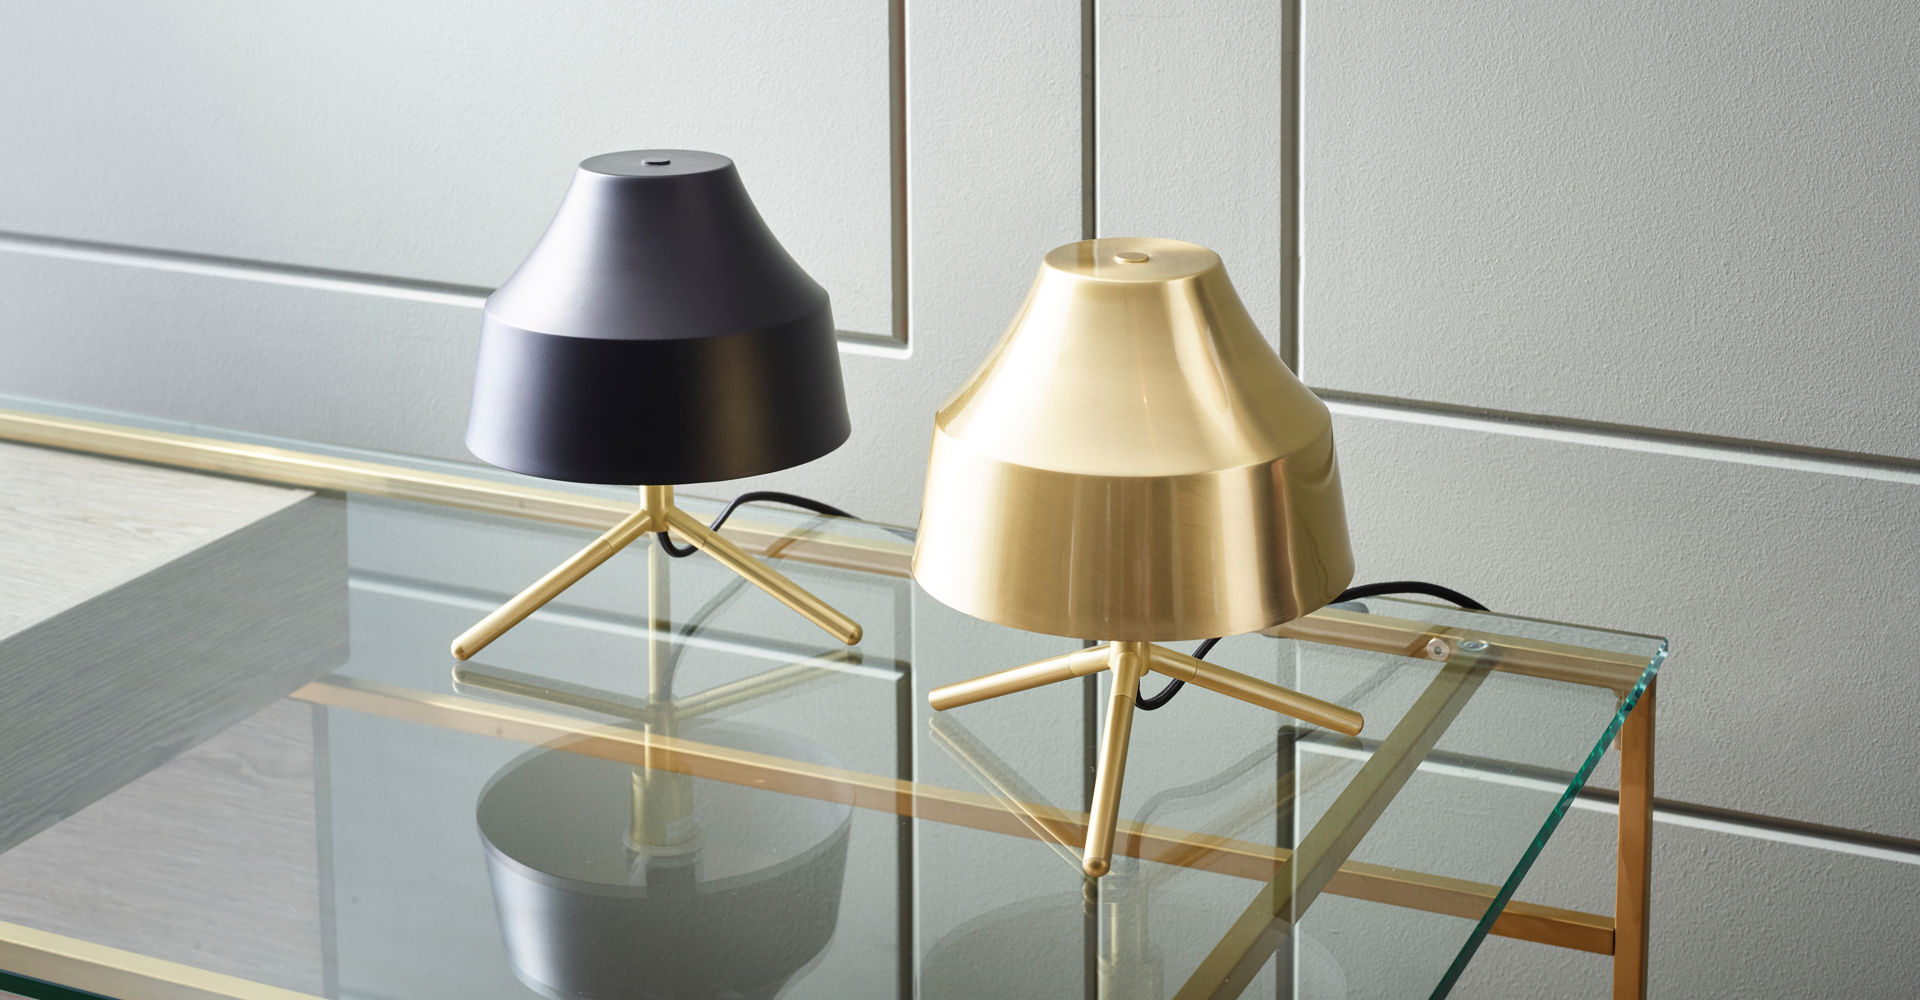 Accessories Hector Bedside Lamps In Black & Brushed Brass by Gillmore @ GillmoreSPACE Ltd